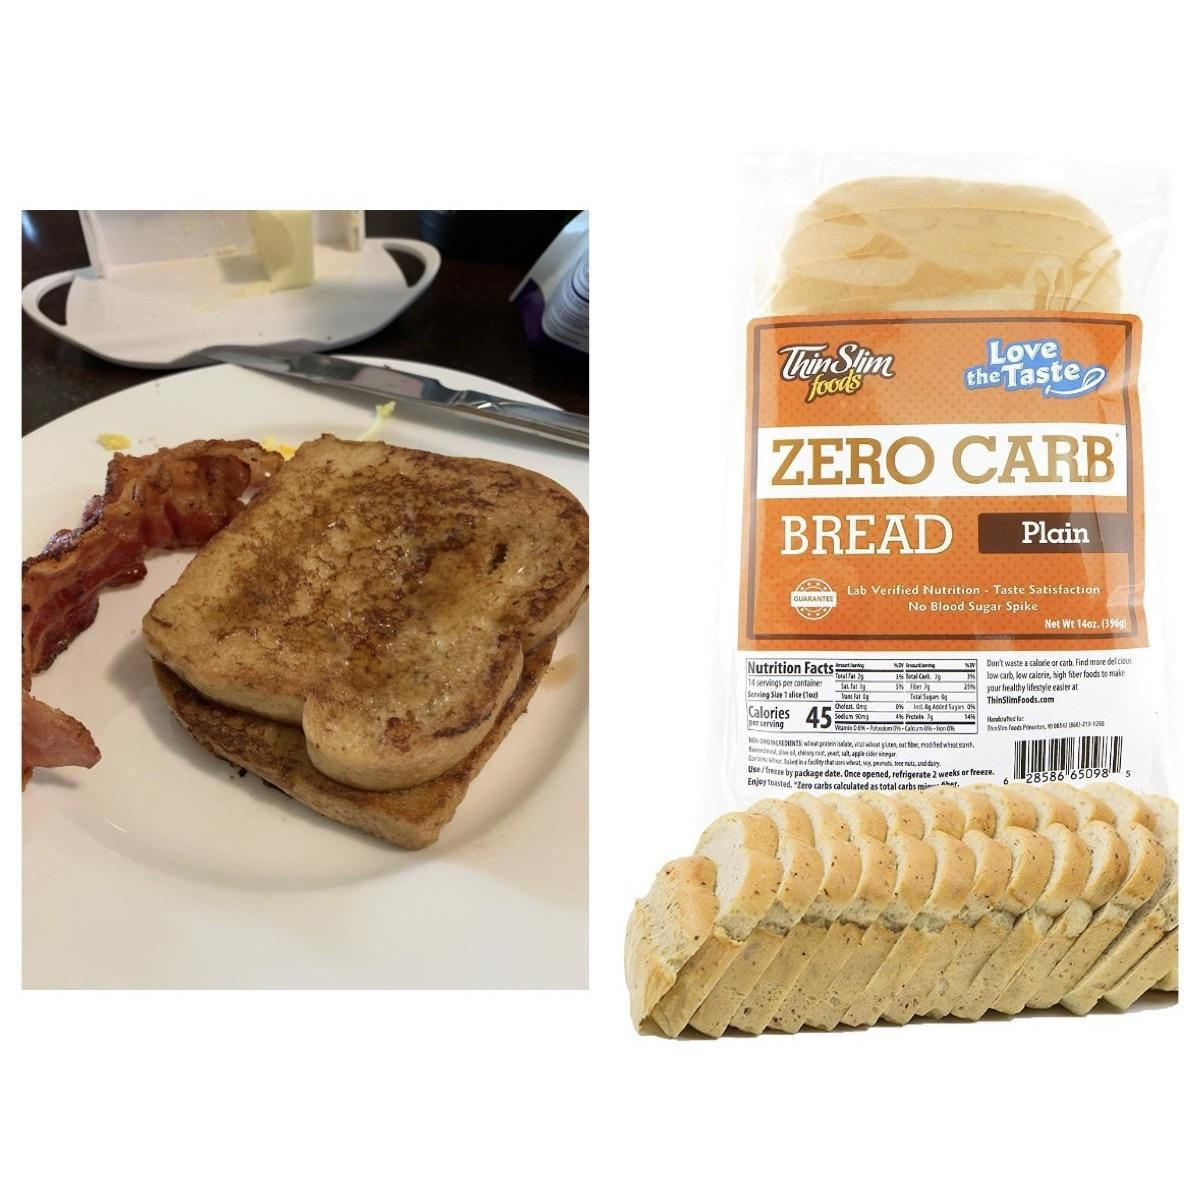 Keto Sandwich Bread Store Bought French toast with store bought keto bread I actually